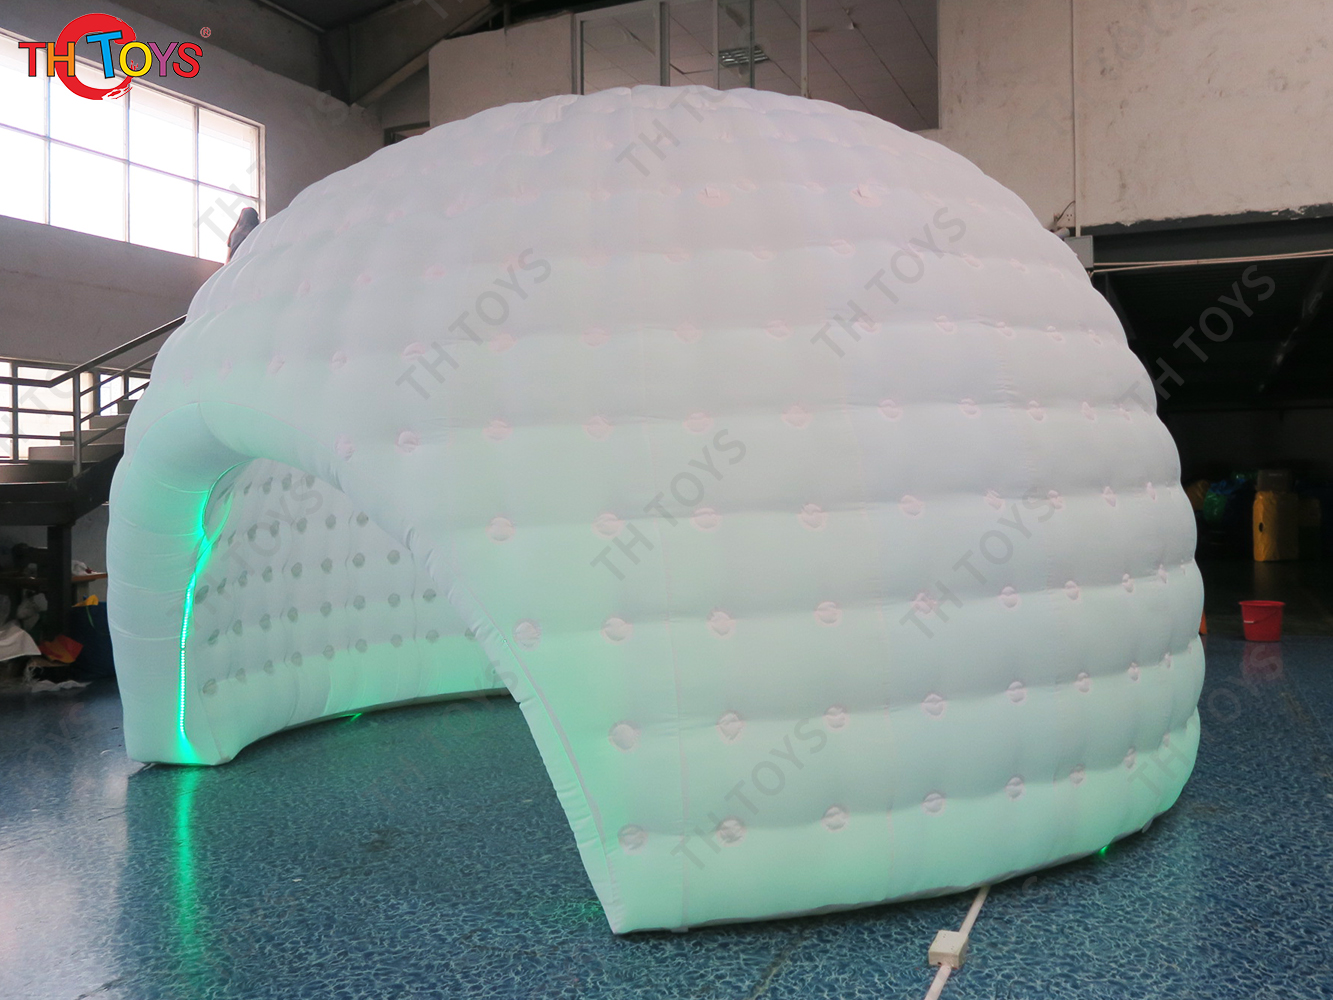 free air ship to door,5x3x3m Large White Inflatable Dome Tent Igloo Air Dome Tent House For Sale